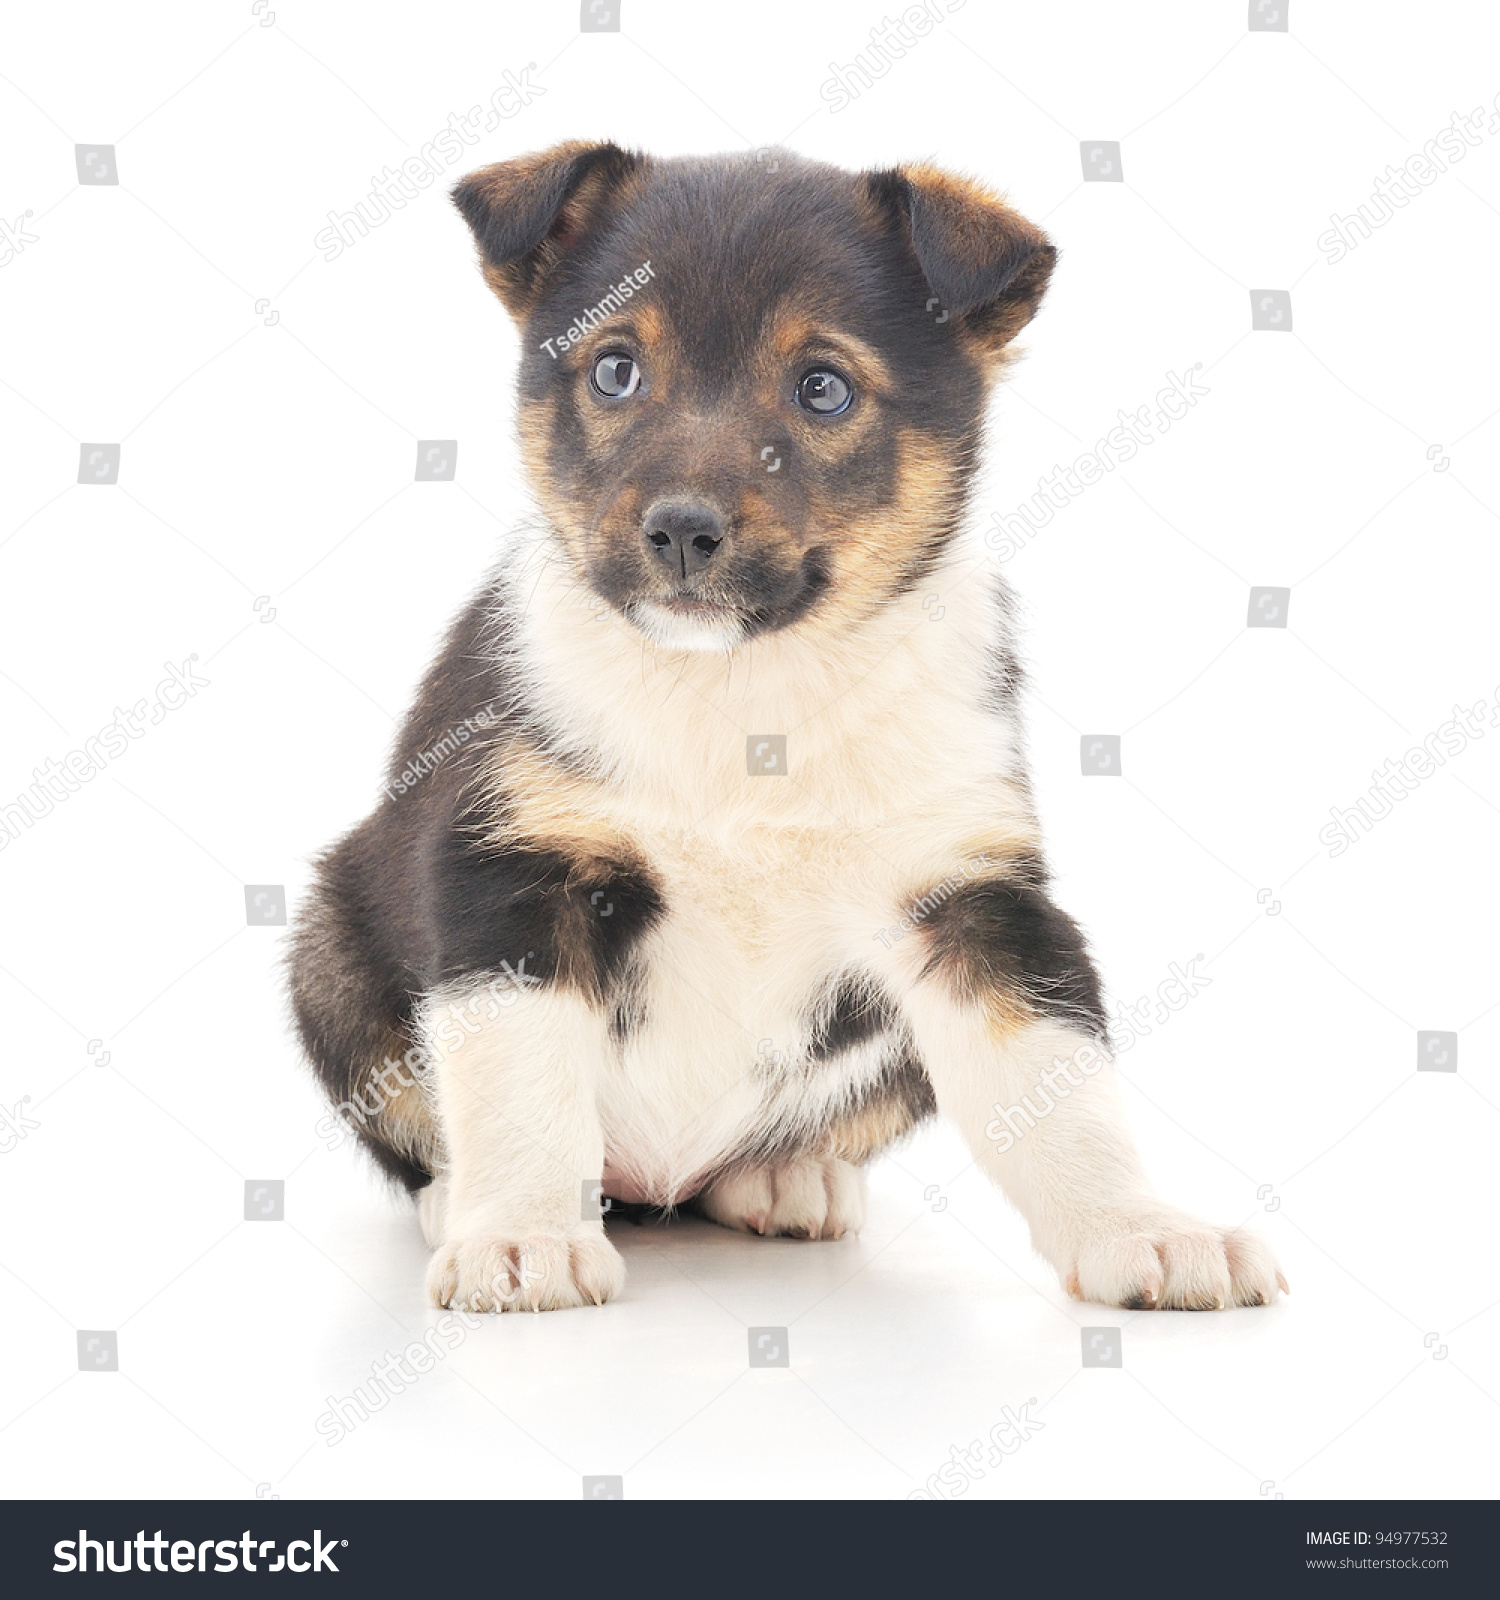 Little Pup Isolated On White Background Stock Photo 94977532 ...